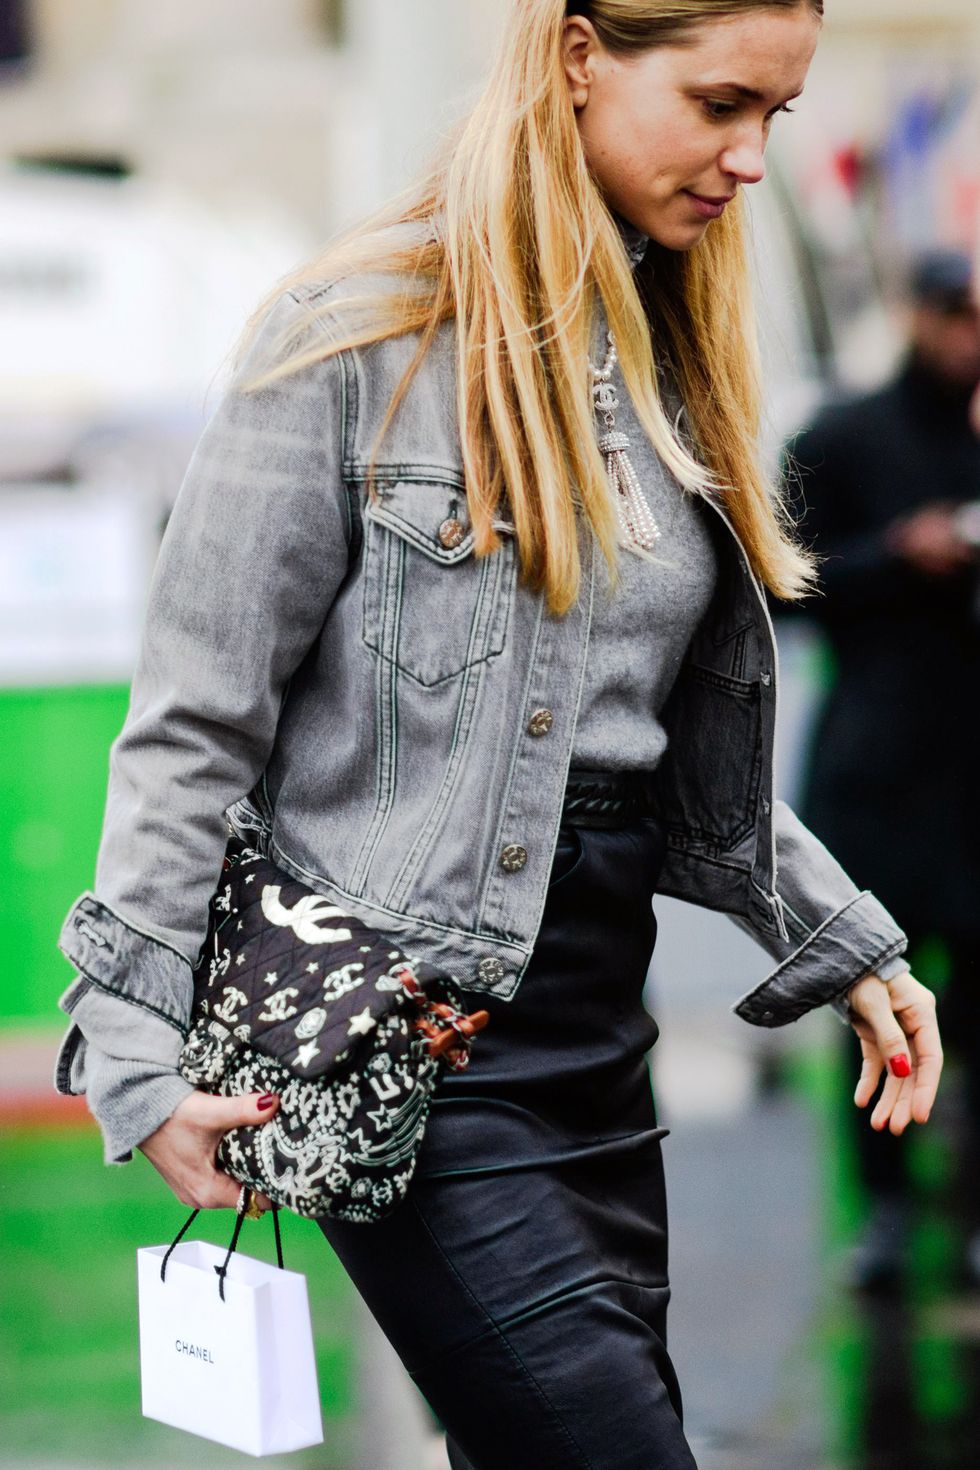 Hair, Street fashion, Clothing, Green, Blond, Jeans, Hairstyle, Beauty, Long hair, Fashion, 